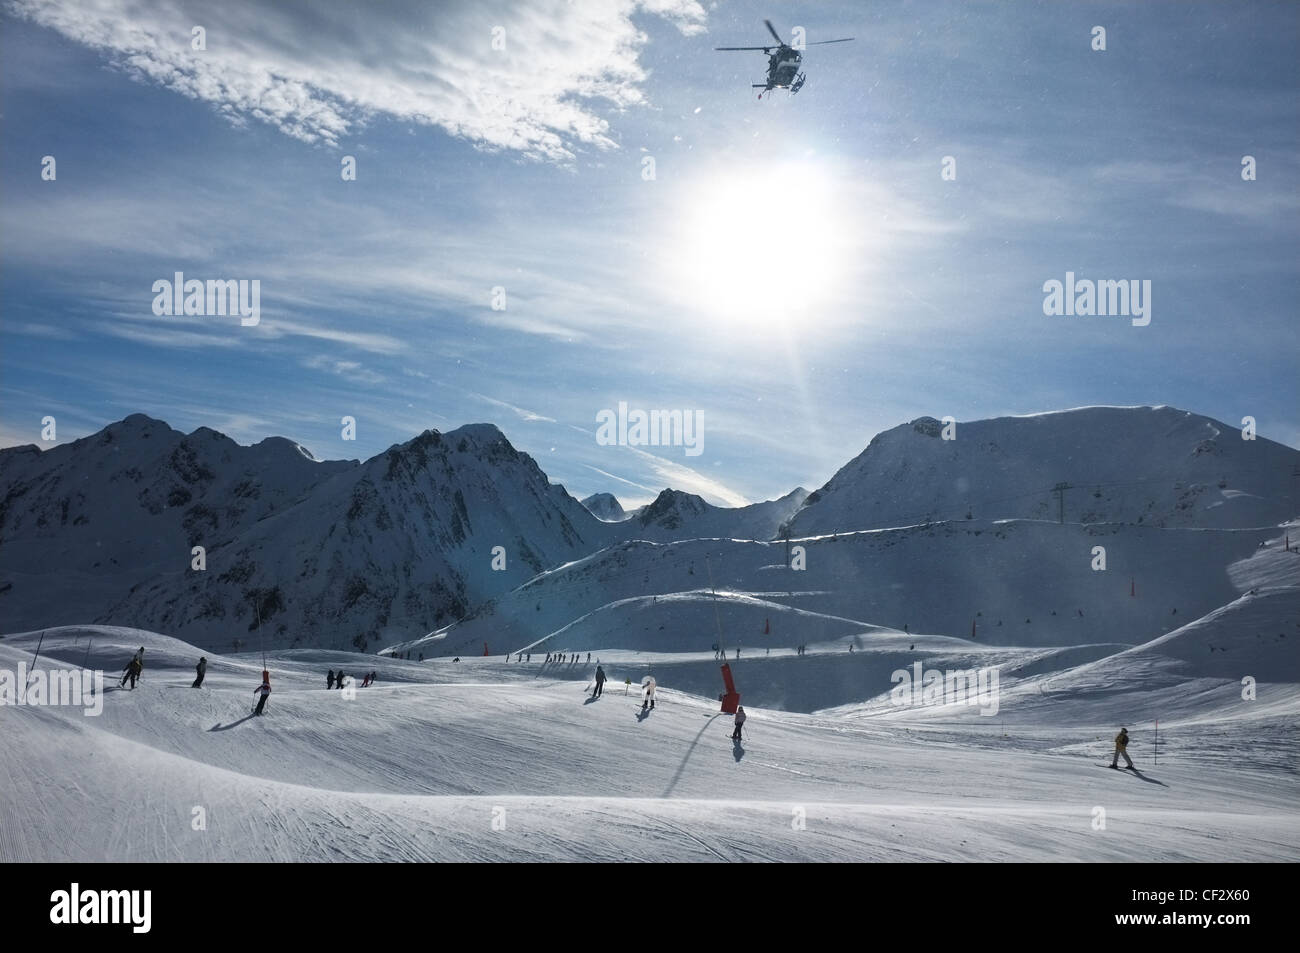 A helicopter takes off over skiers at Peyragudes ski resort, Midi-Pyrenees,  France Stock Photo - Alamy